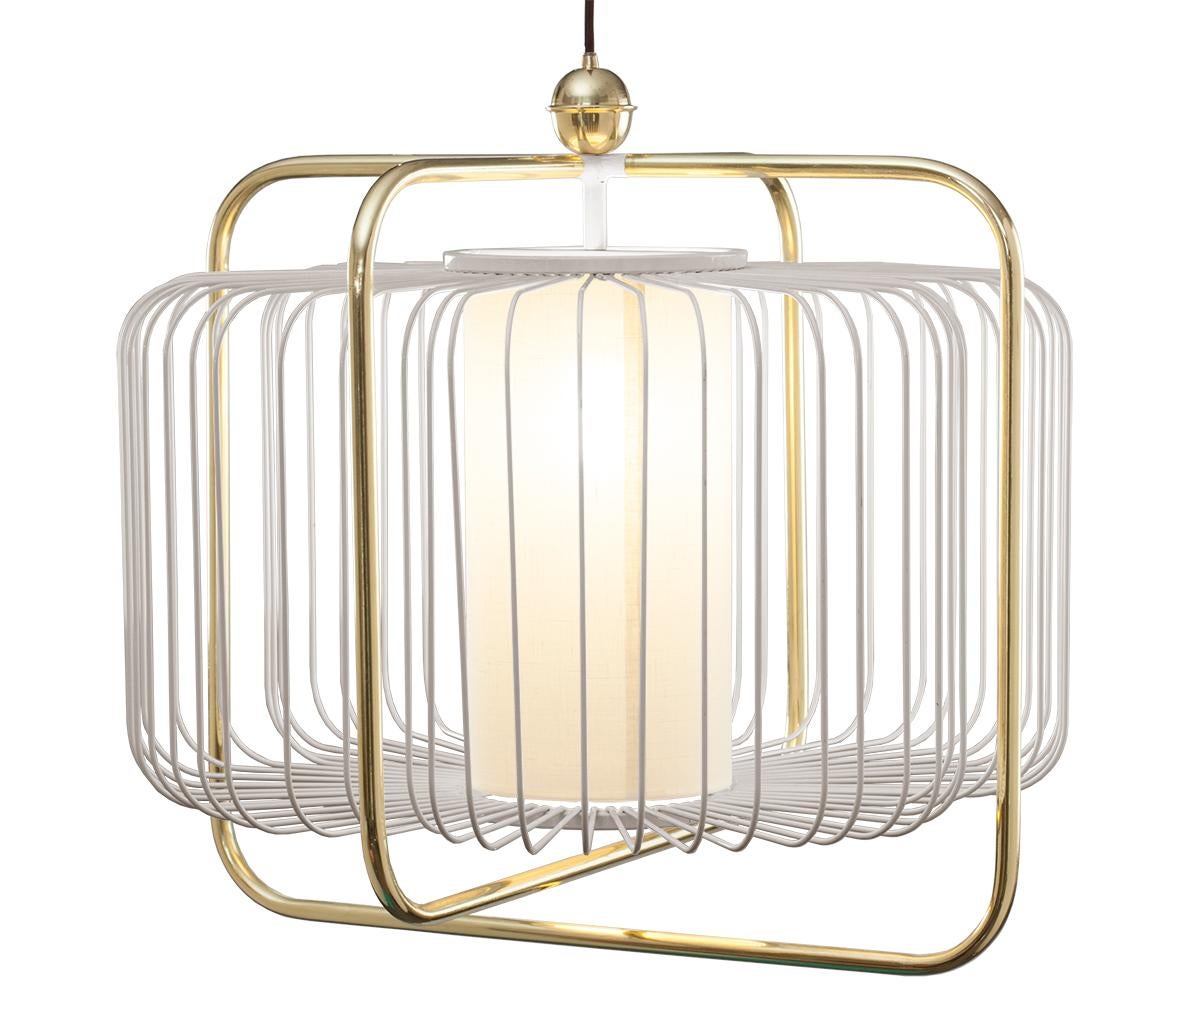 Contemporary Art Deco inspired Jules I Pendant Lamp in Brass and Black For Sale 5